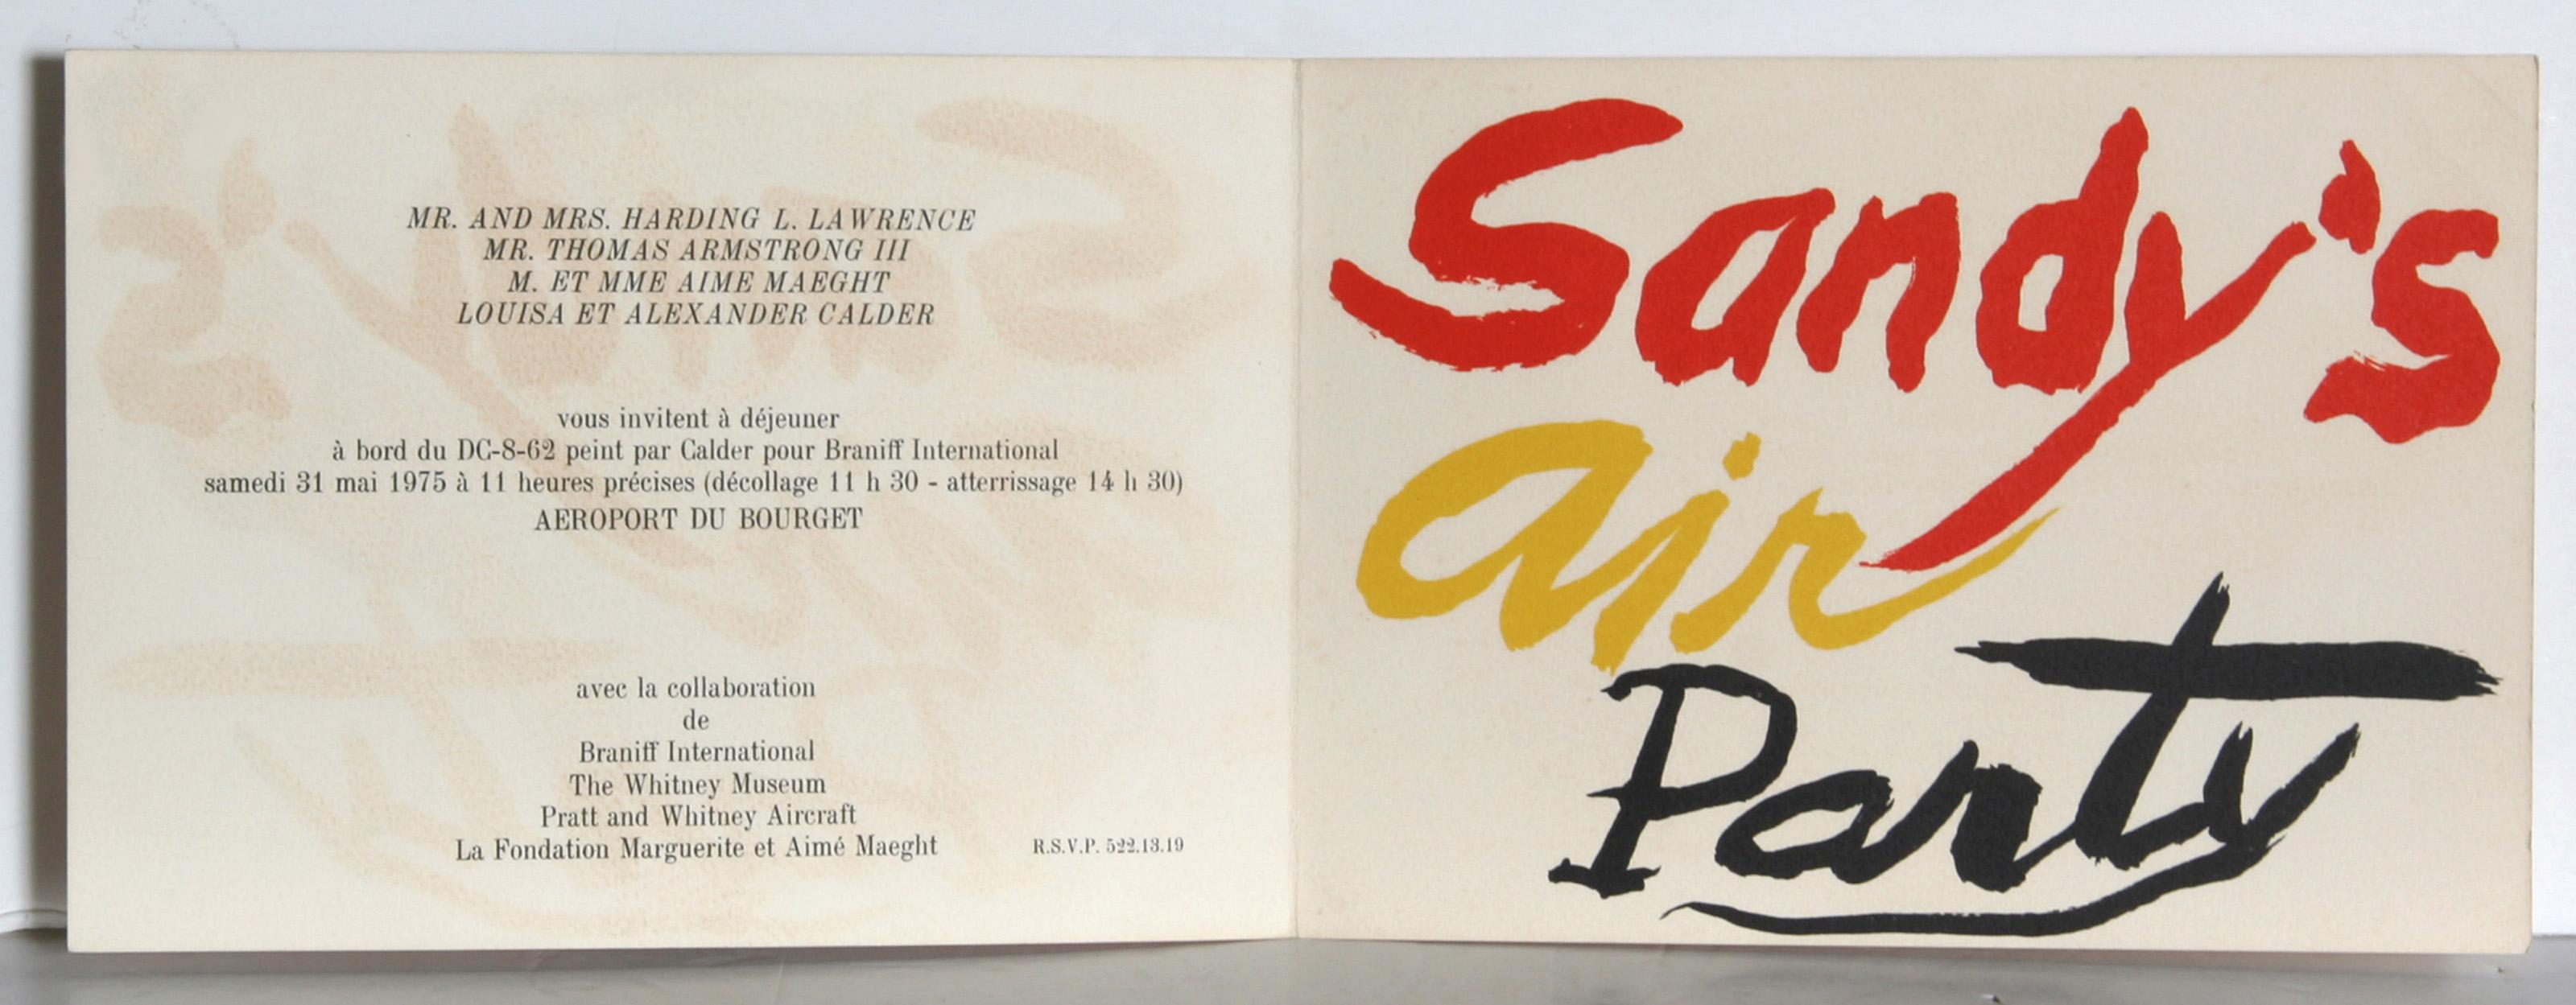 Invitation to Sandy's Air Party, Lithograph by Alexander Calder For Sale 1